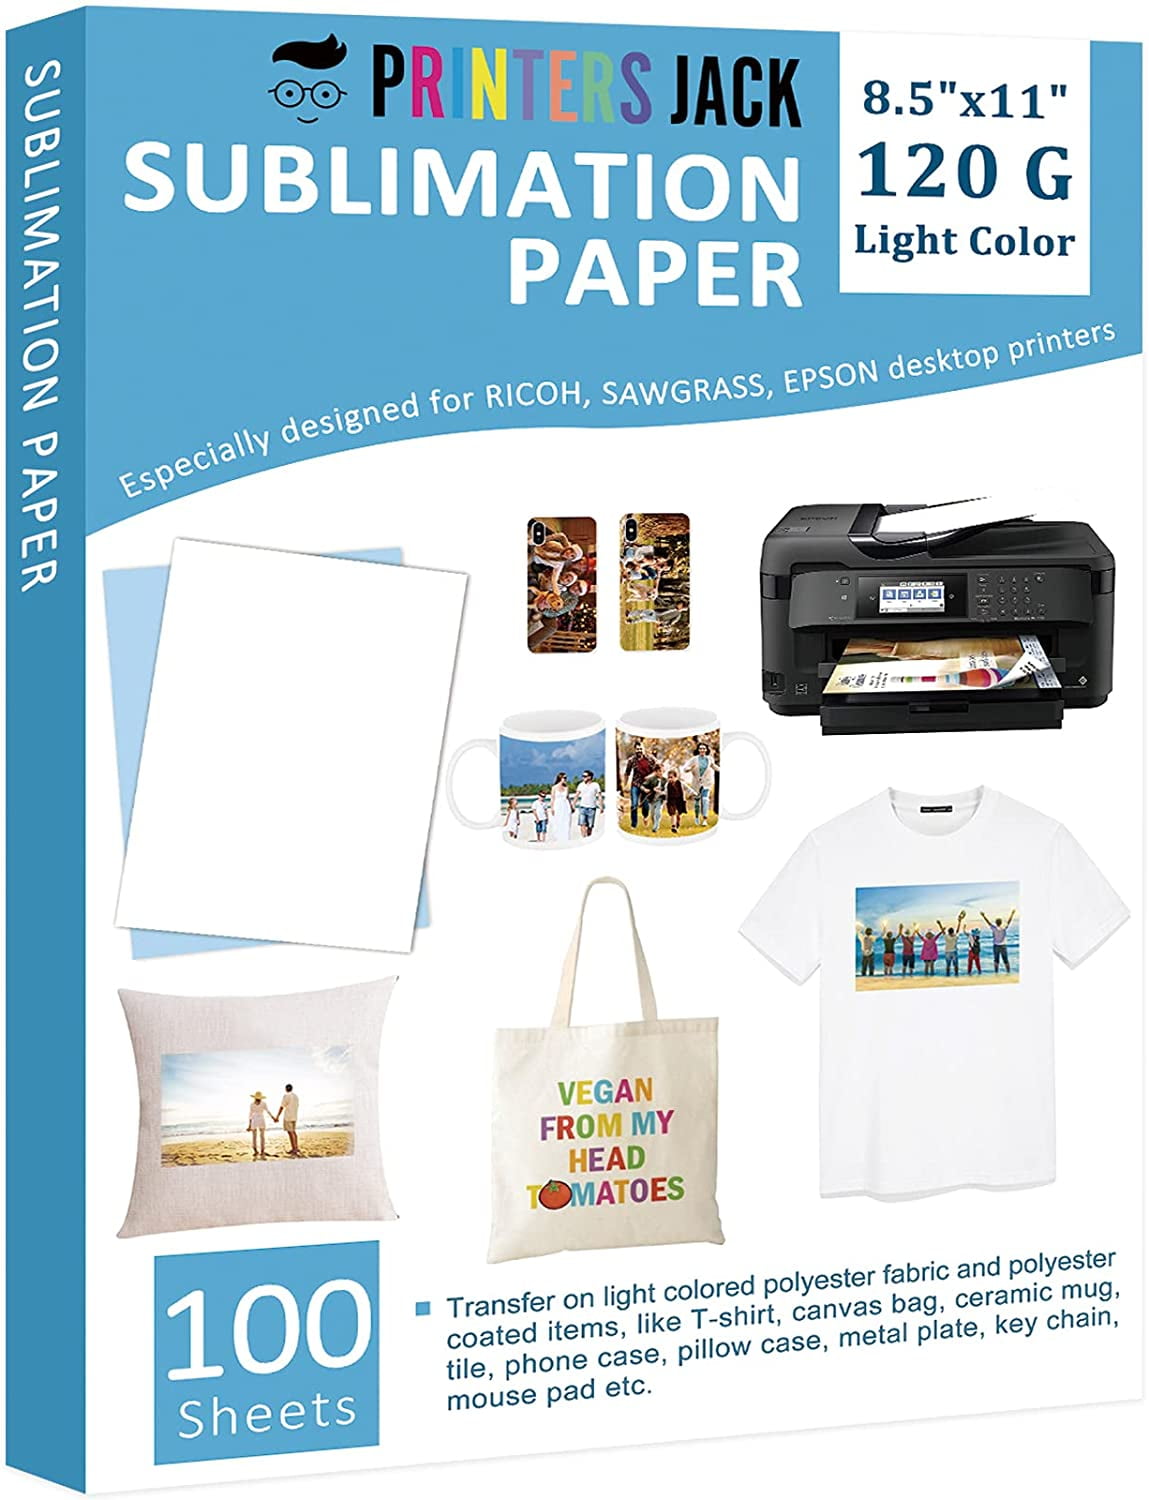 Everyday Multifunction Copier A4 Plain Printing Paper White 80gsm 